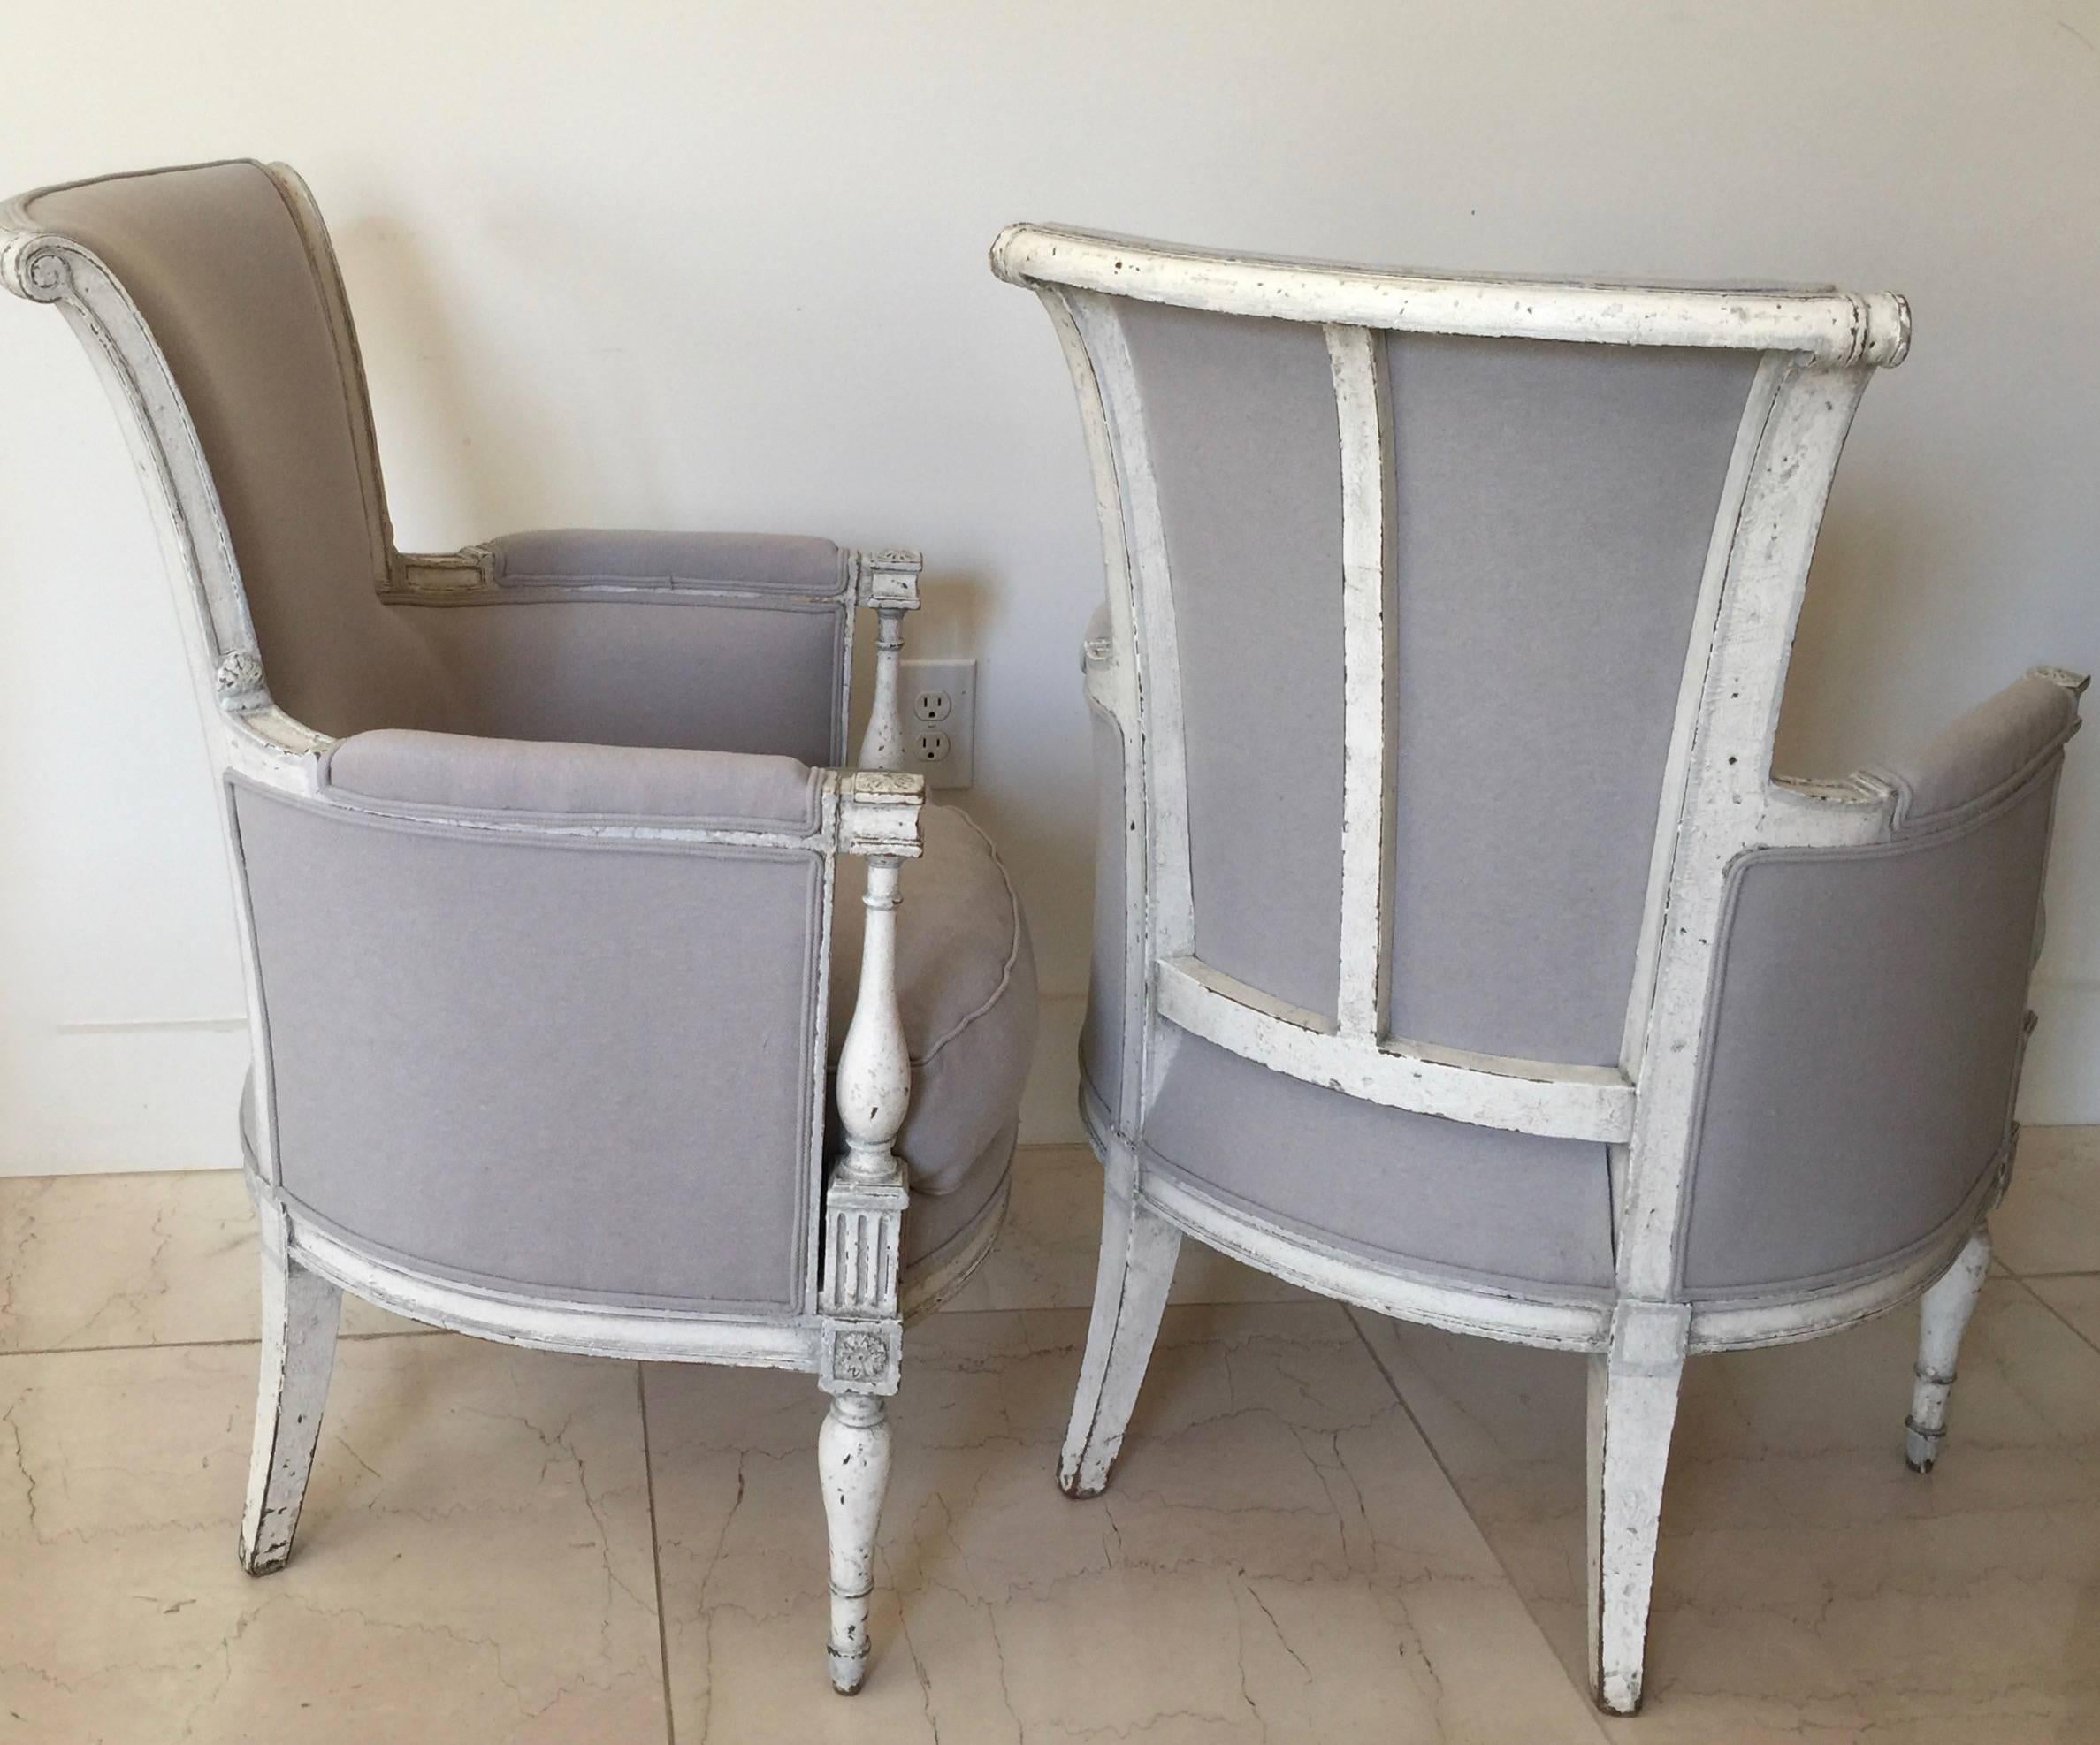 A pair of painted 19th century French Directoire style Bergères. The horned backs (à cornes) are coved with side and top rails that curve inward to create horns at the corners and terminating in scrolls, the armrests consoles baluster shaped, the